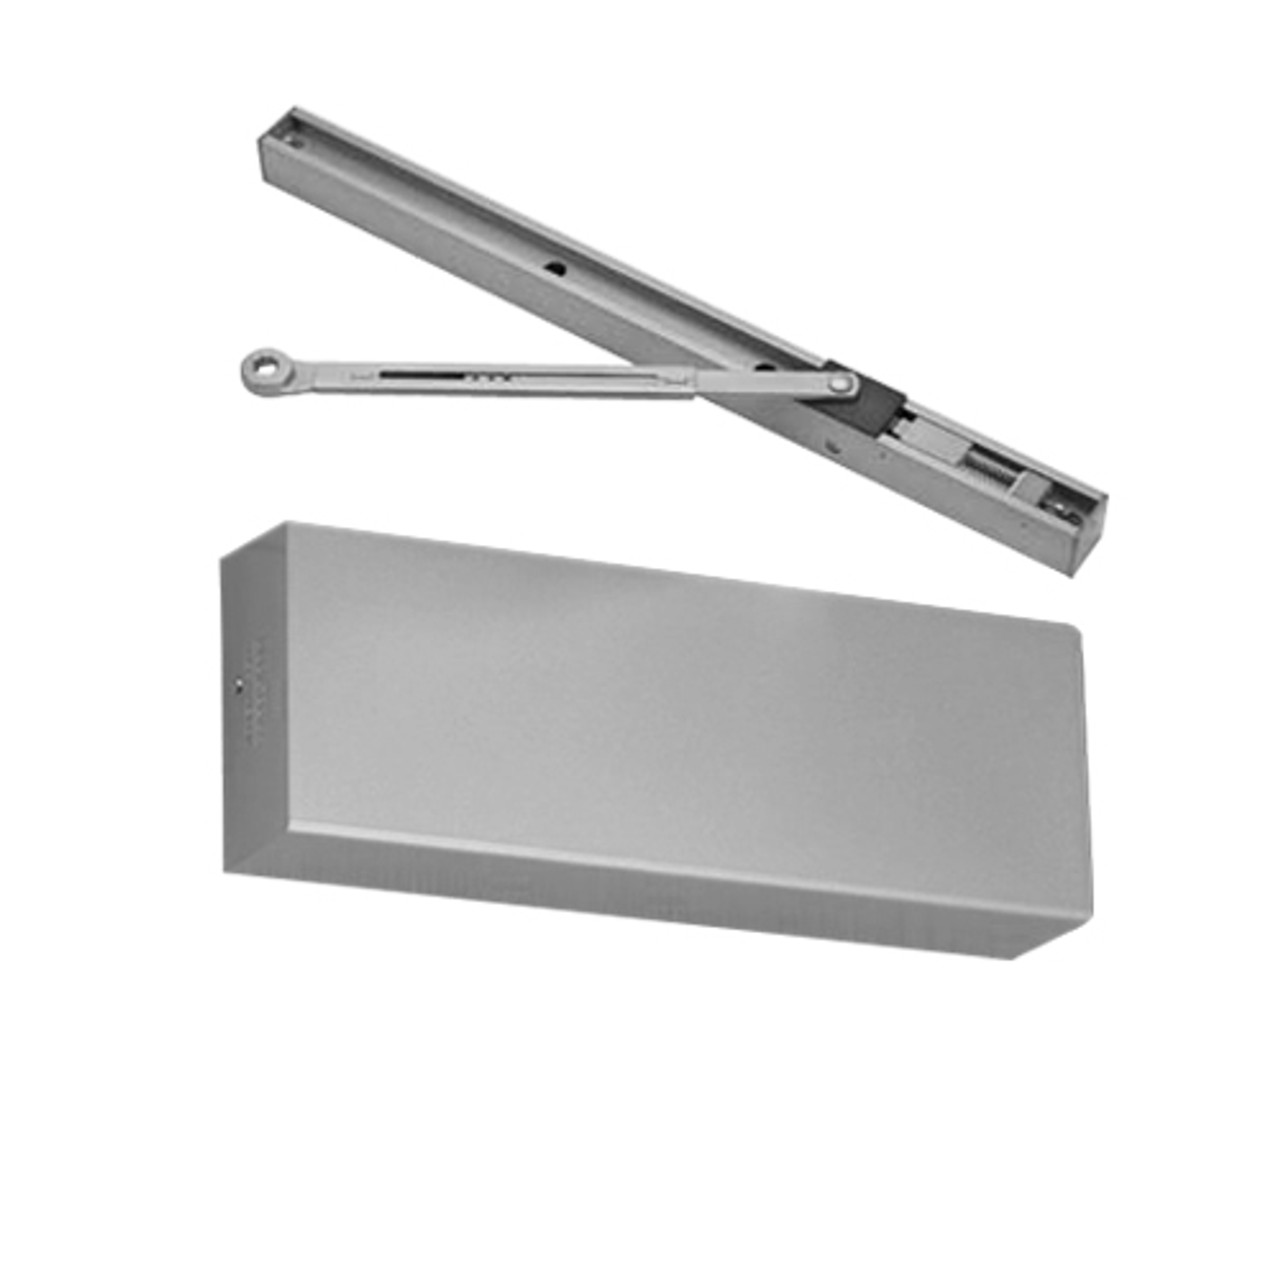 PS9500STHM-689 Norton 9500 Series Hold Open Cast Iron Door Closer with Push Side Slide Track in Aluminum Finish